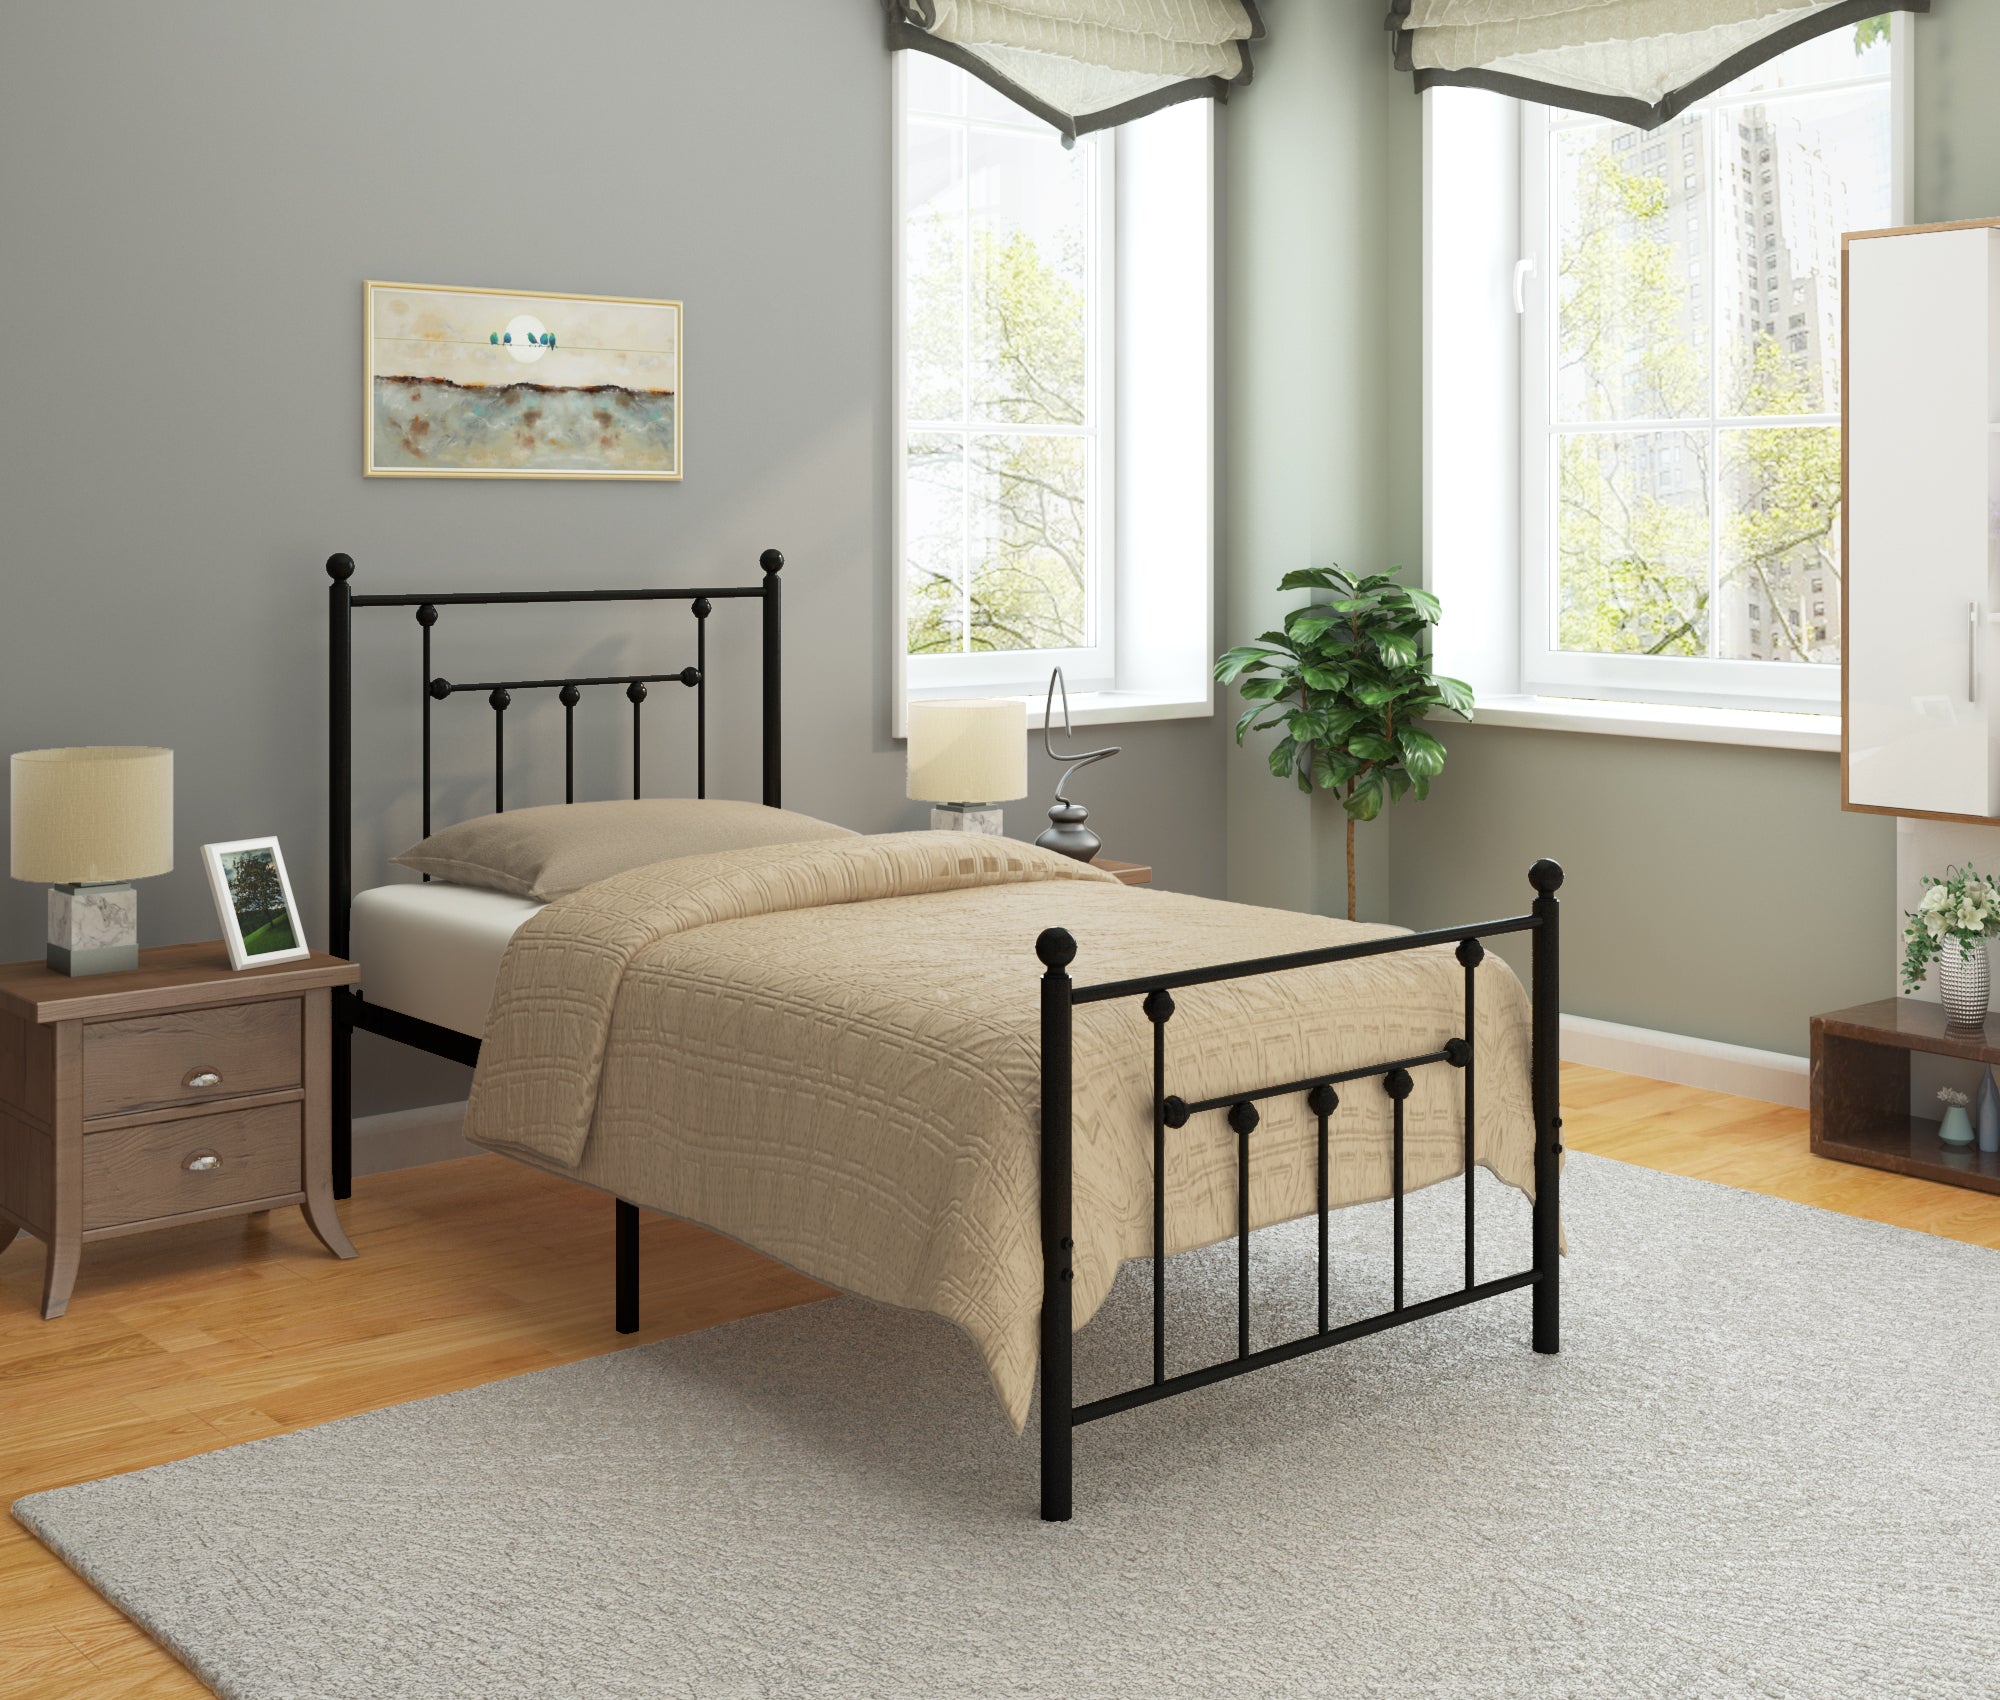 Victorian Bed Frame - Black - Ambee21